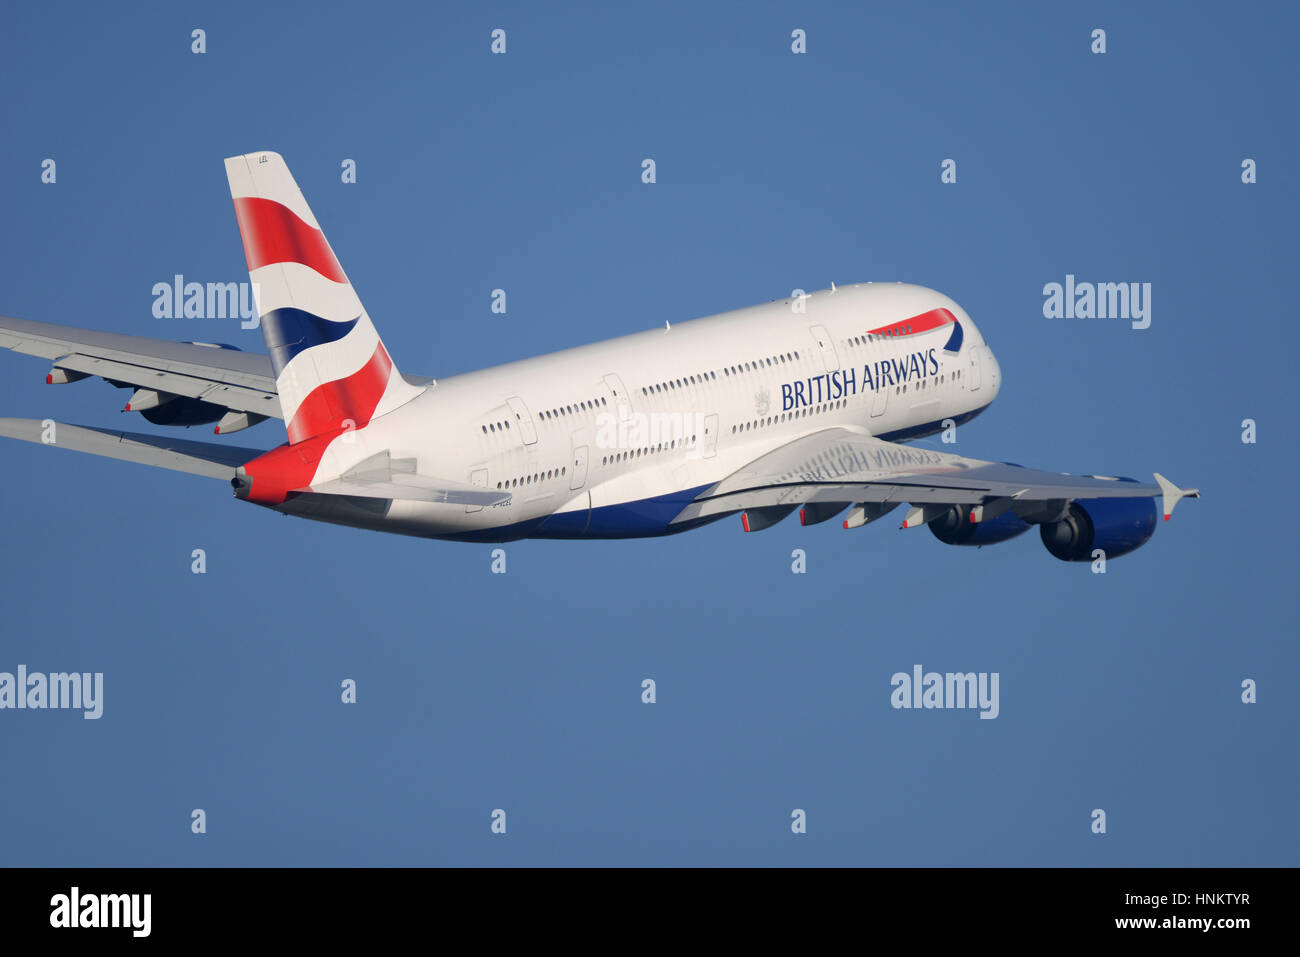 British Airways Airbus A380-841 G-XLEL taking off from London Heathrow Airport in blue sky. Space for copy Stock Photo